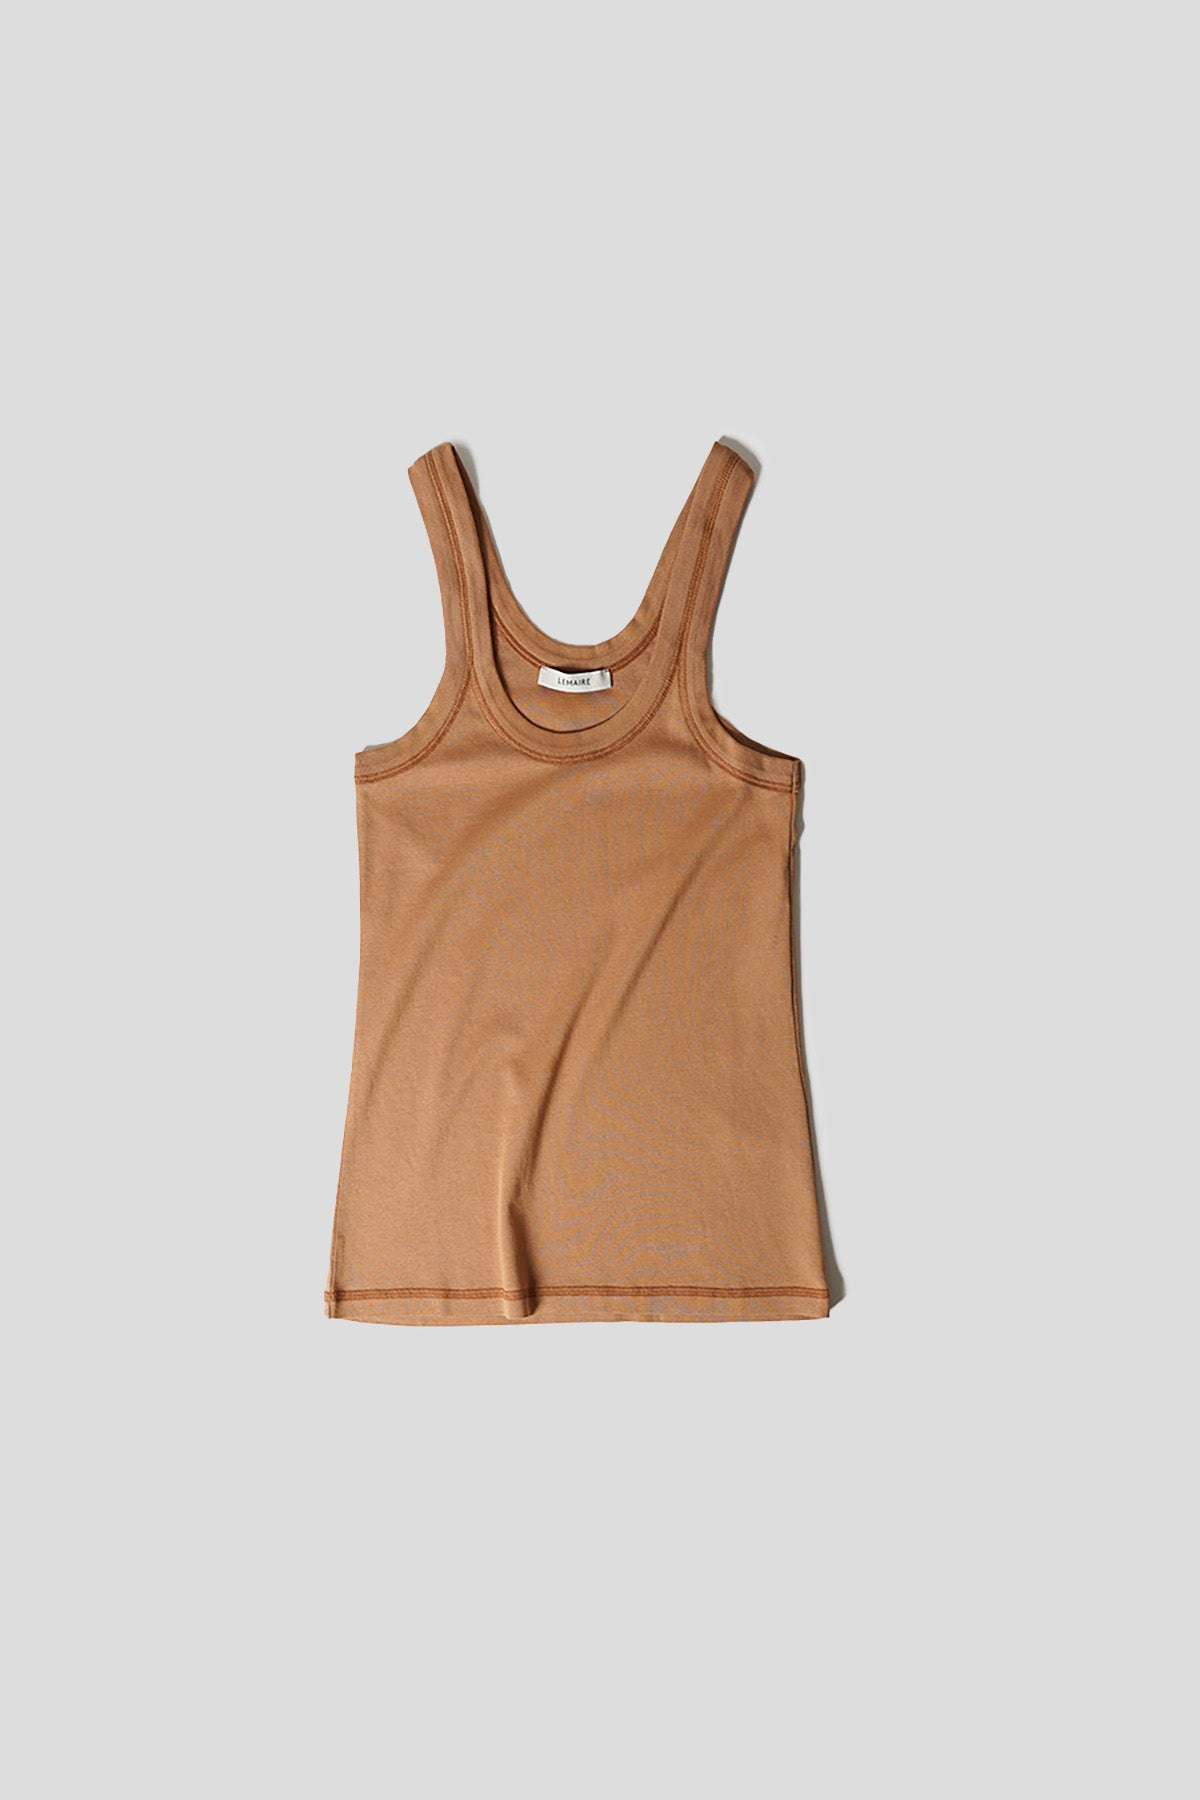 LEMAIRE - SAND RIBBED TANK TOP - LE LABO STORE